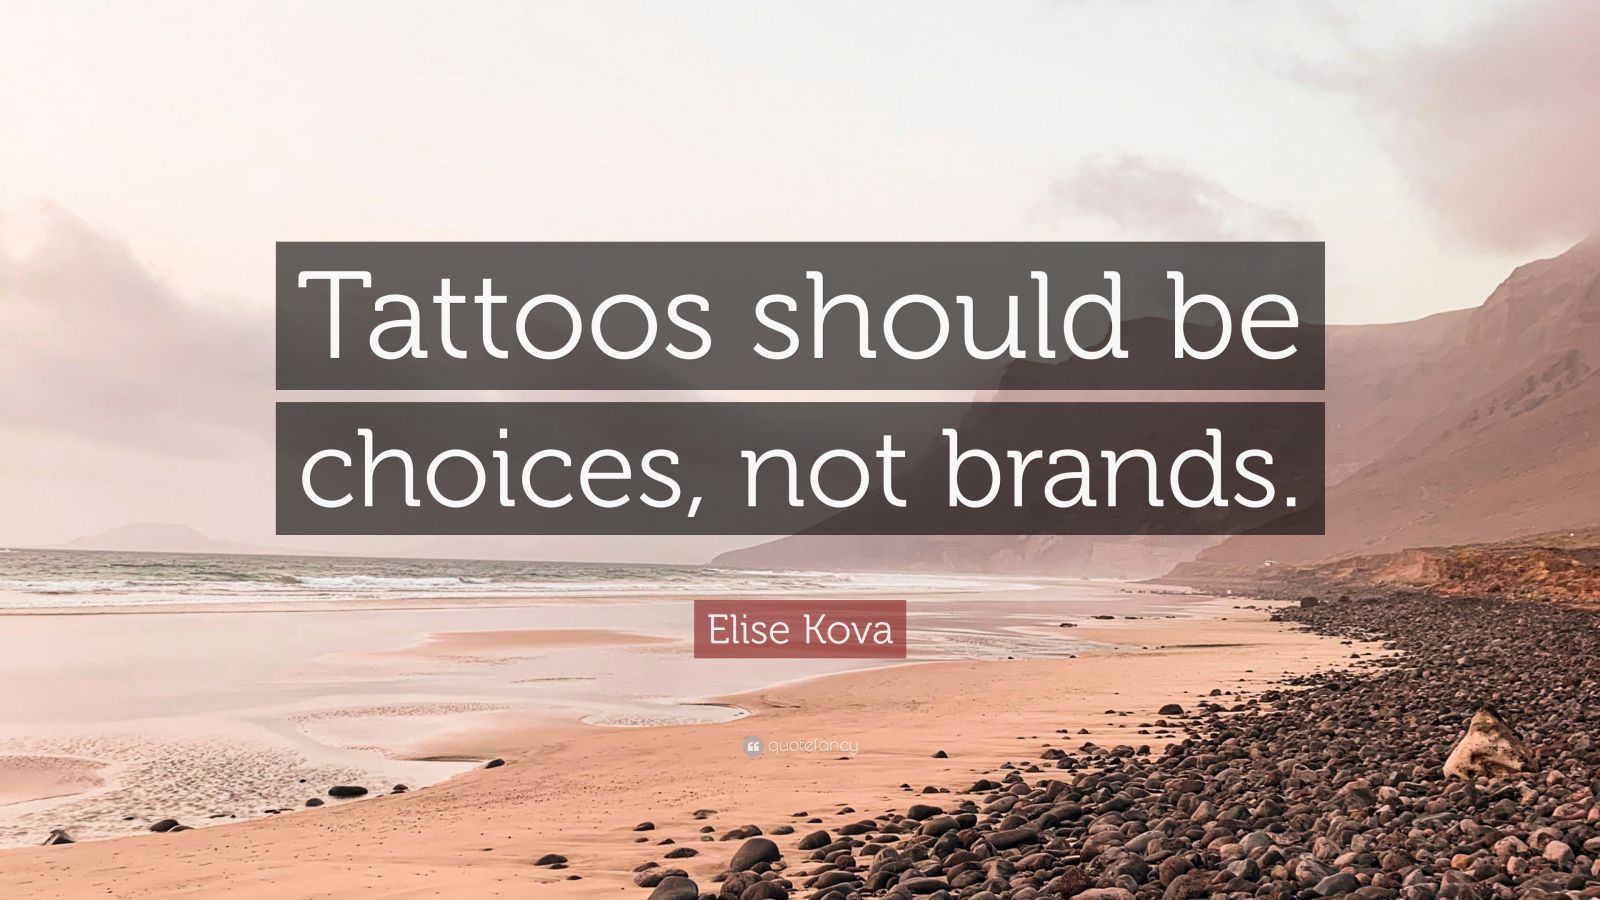 7329870 Elise Kova Quote Tattoos should be choices not brands